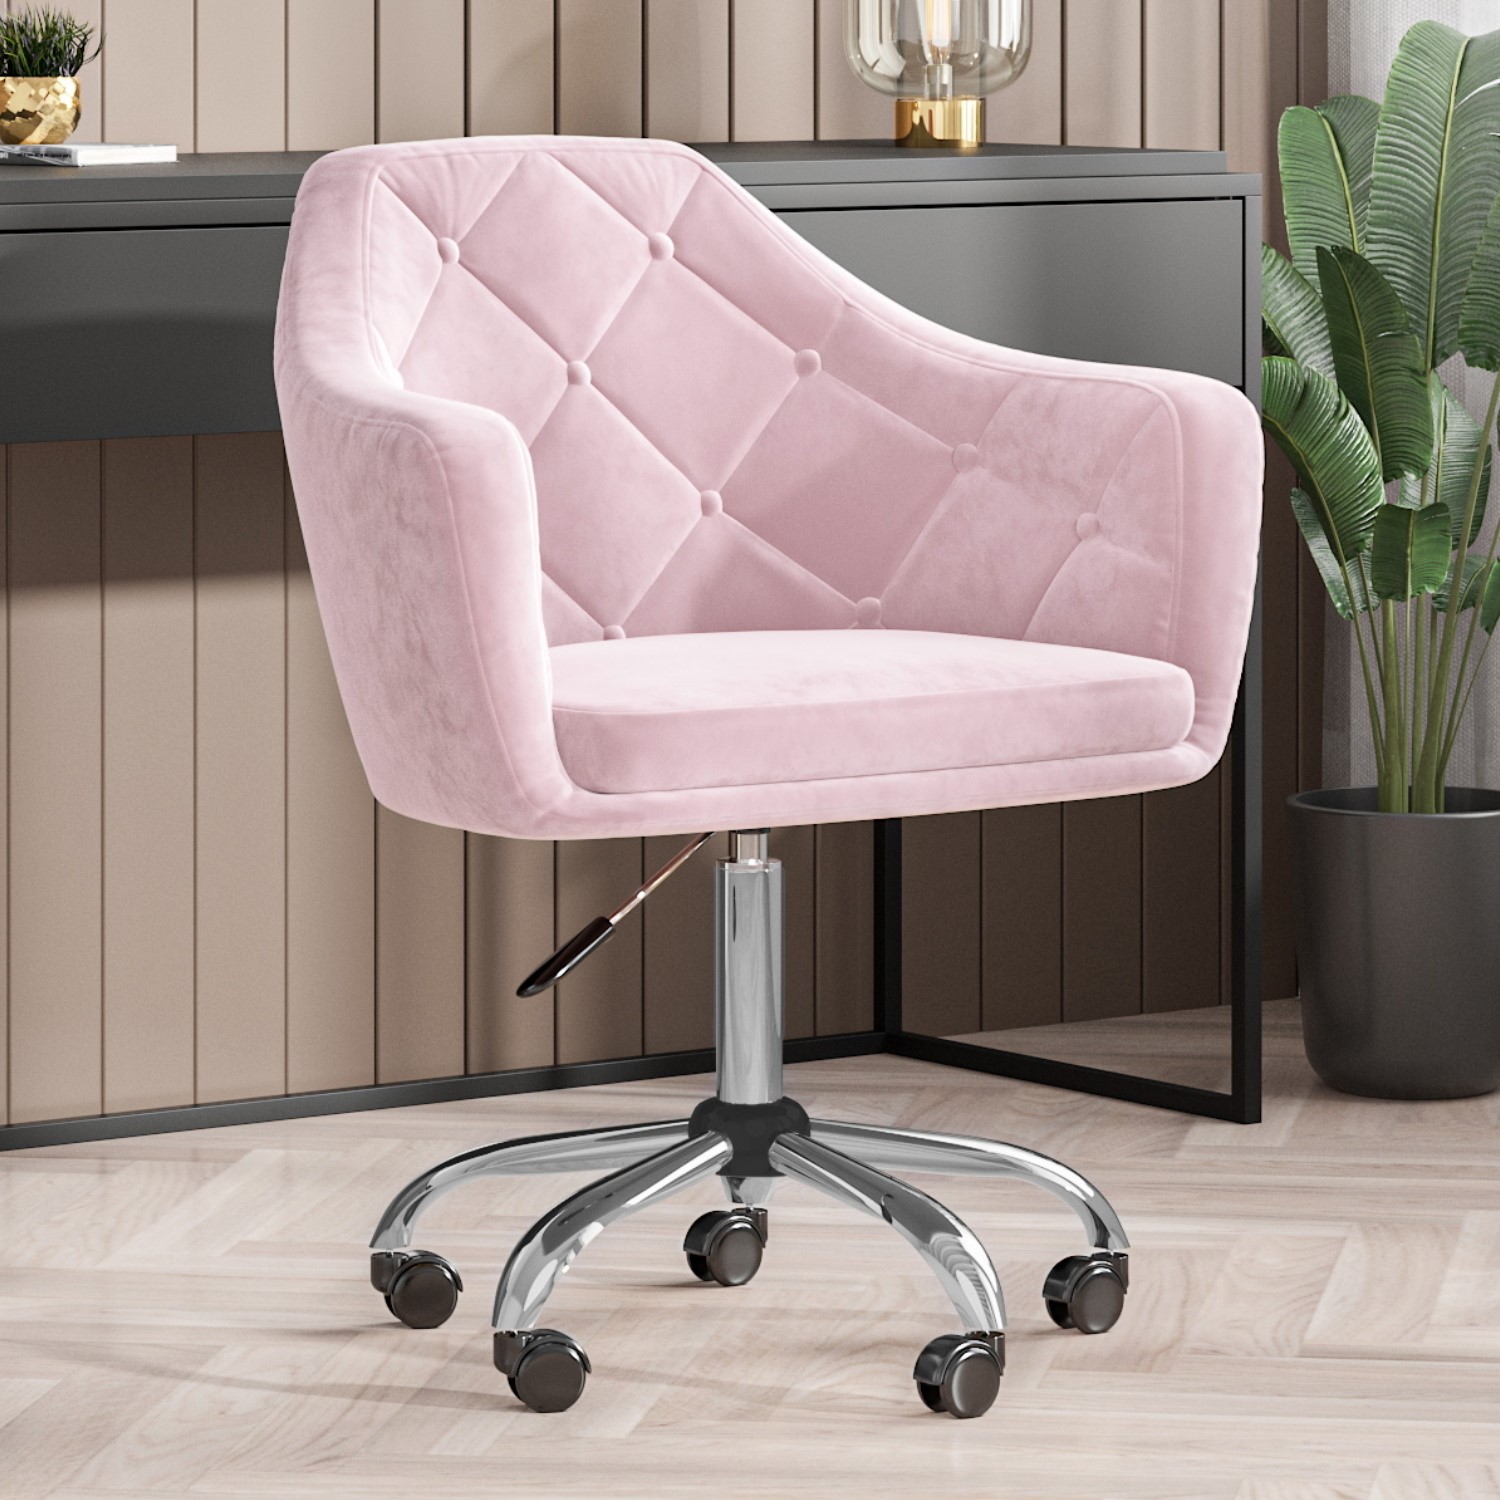 Read more about Pink velvet chesterfield swivel office chair marley